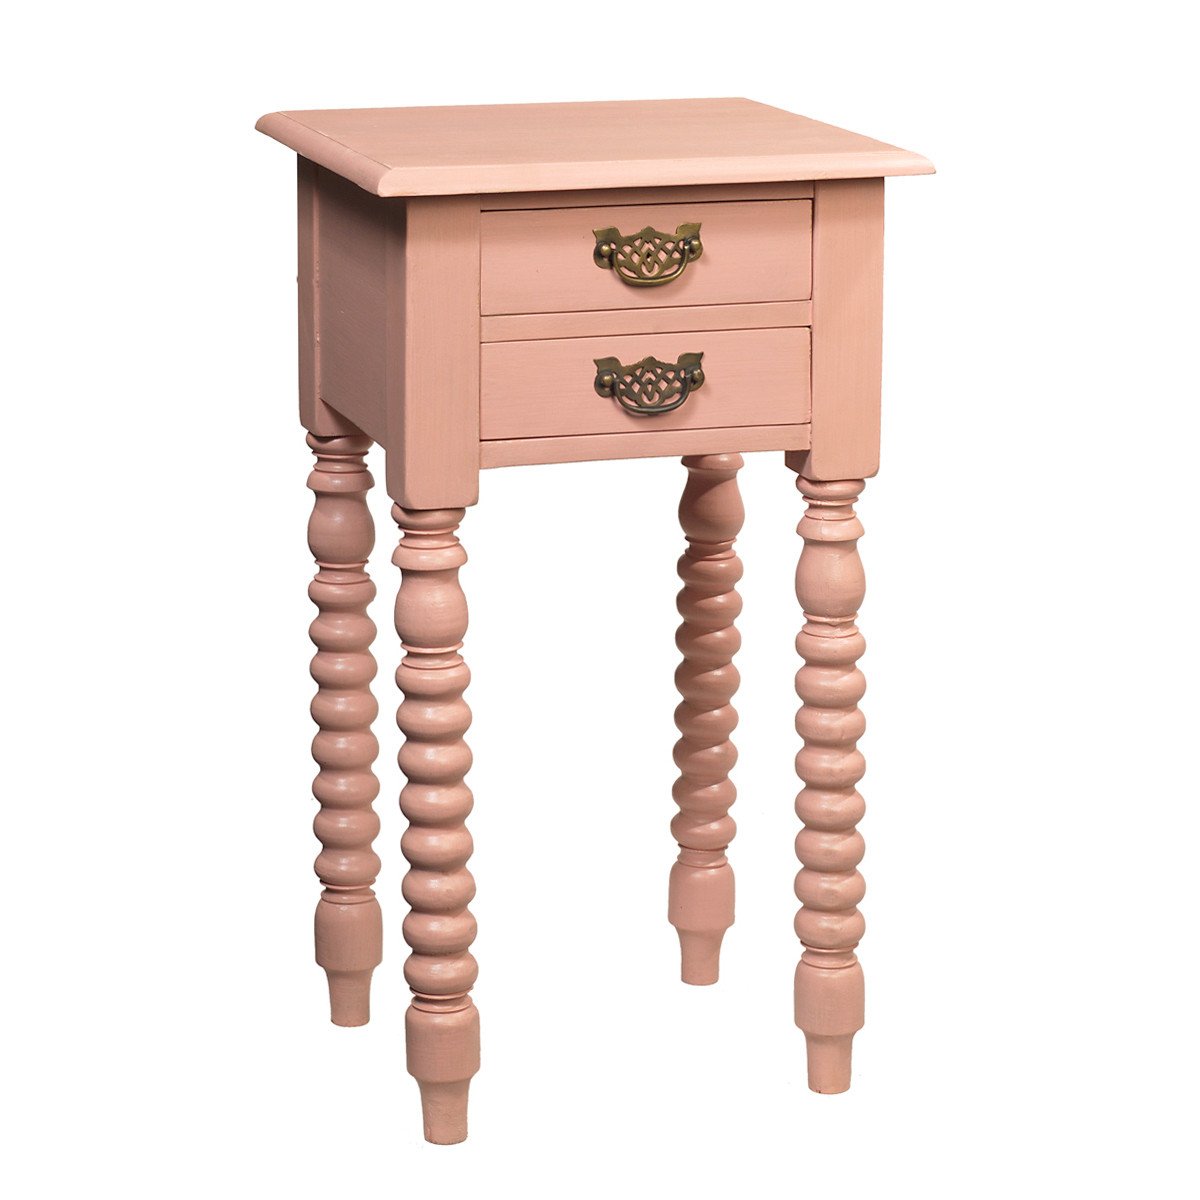 batam accent table powder pink wrightwood furniture bobbin metal bedroom chairs outdoor brisbane leadlight lamps mirrored occasional manufacturers white wicker bench couch feet